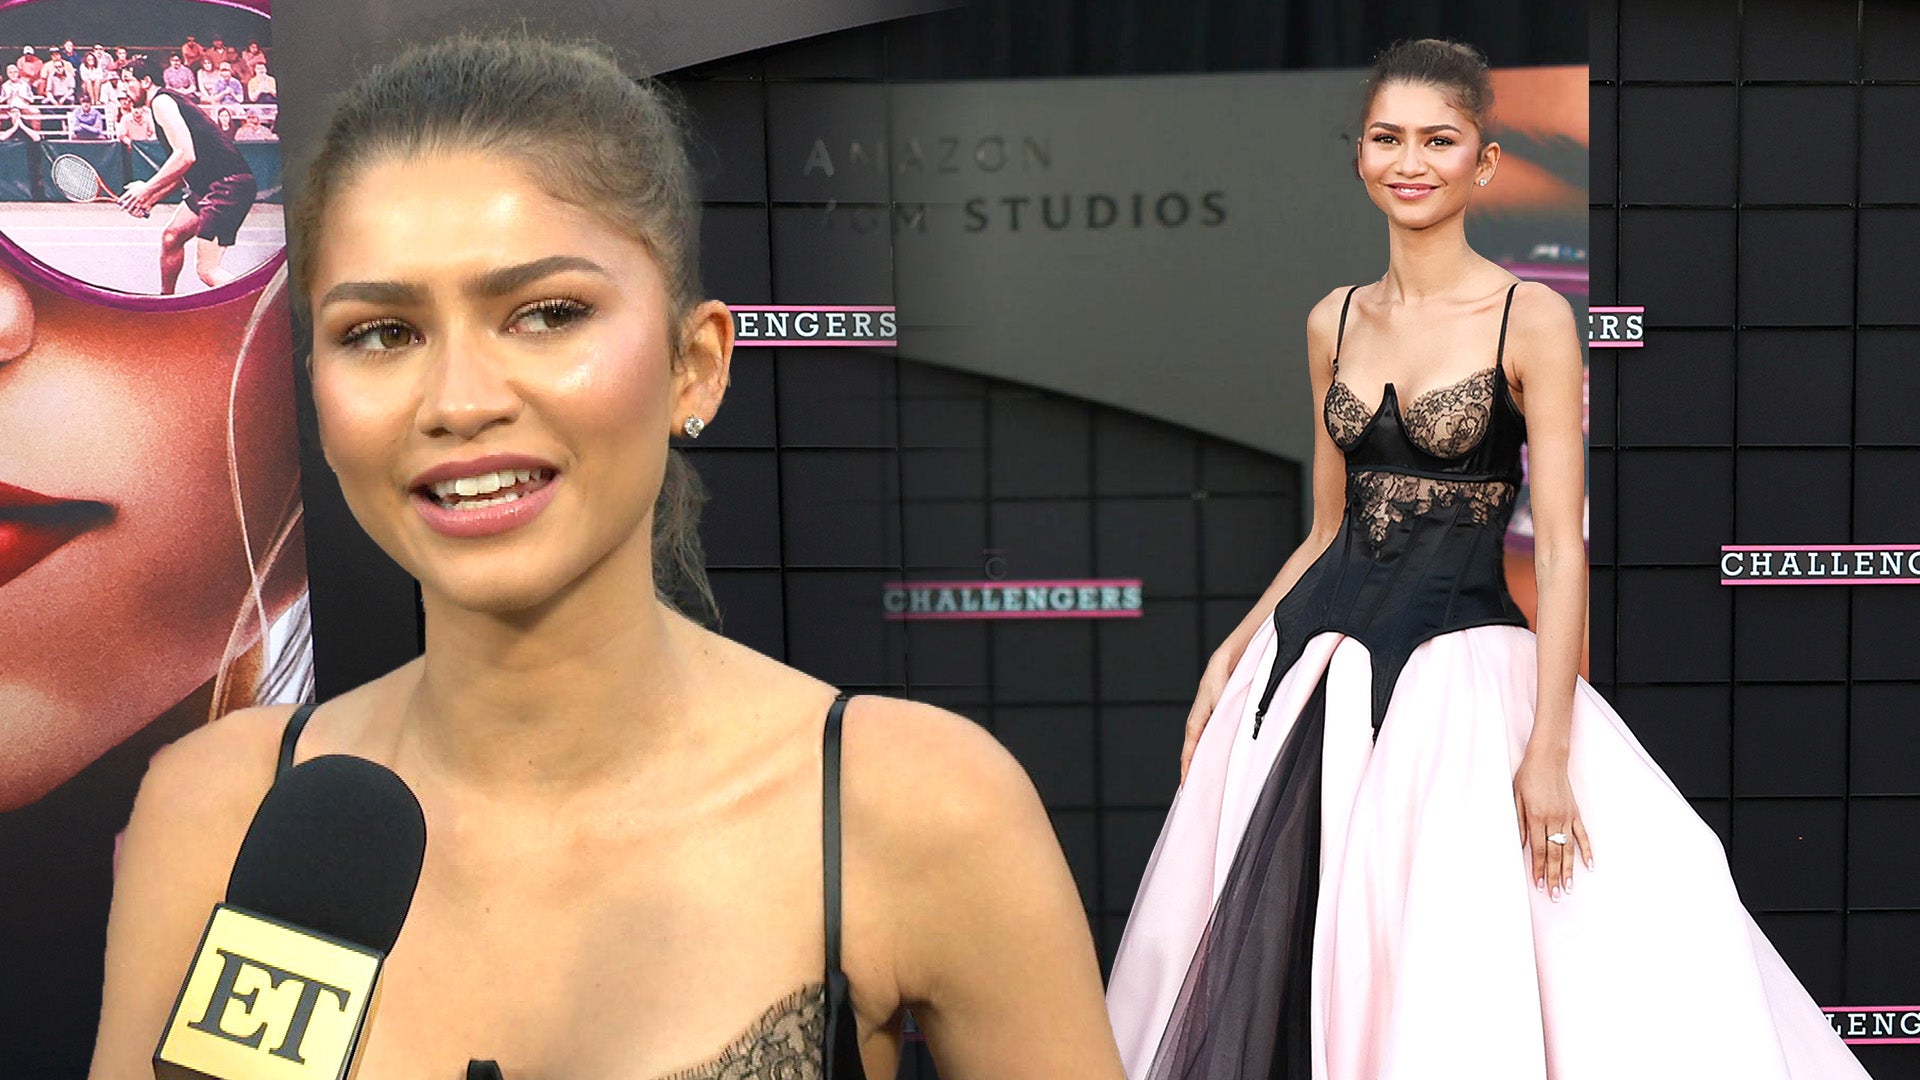 Zendaya Becomes 'Red Carpet Character' on 'Challengers' Press Tour